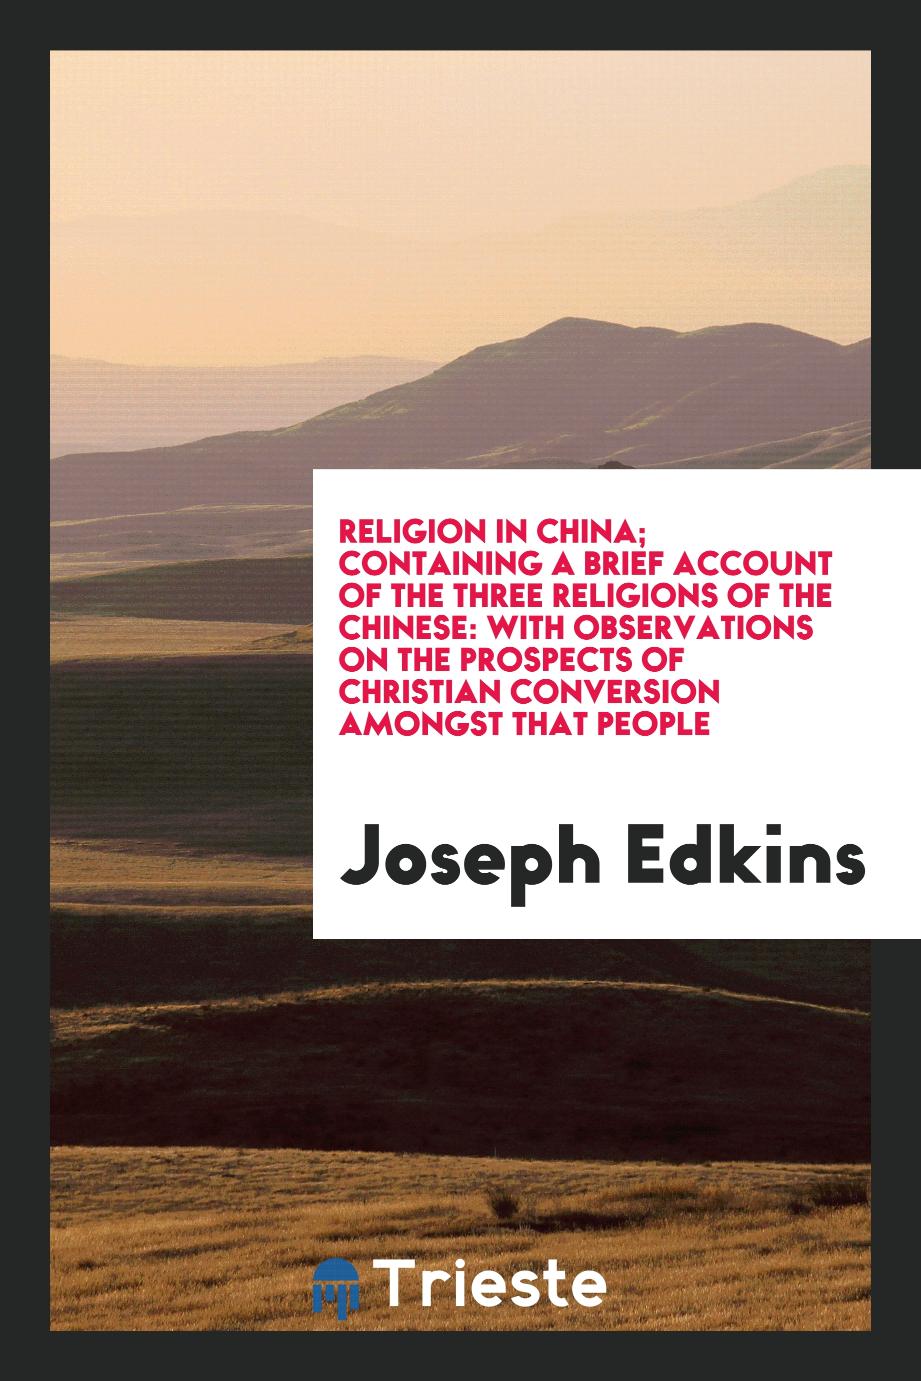 Religion in China; containing a brief account of the three religions of the Chinese: with observations on the prospects of Christian conversion amongst that people